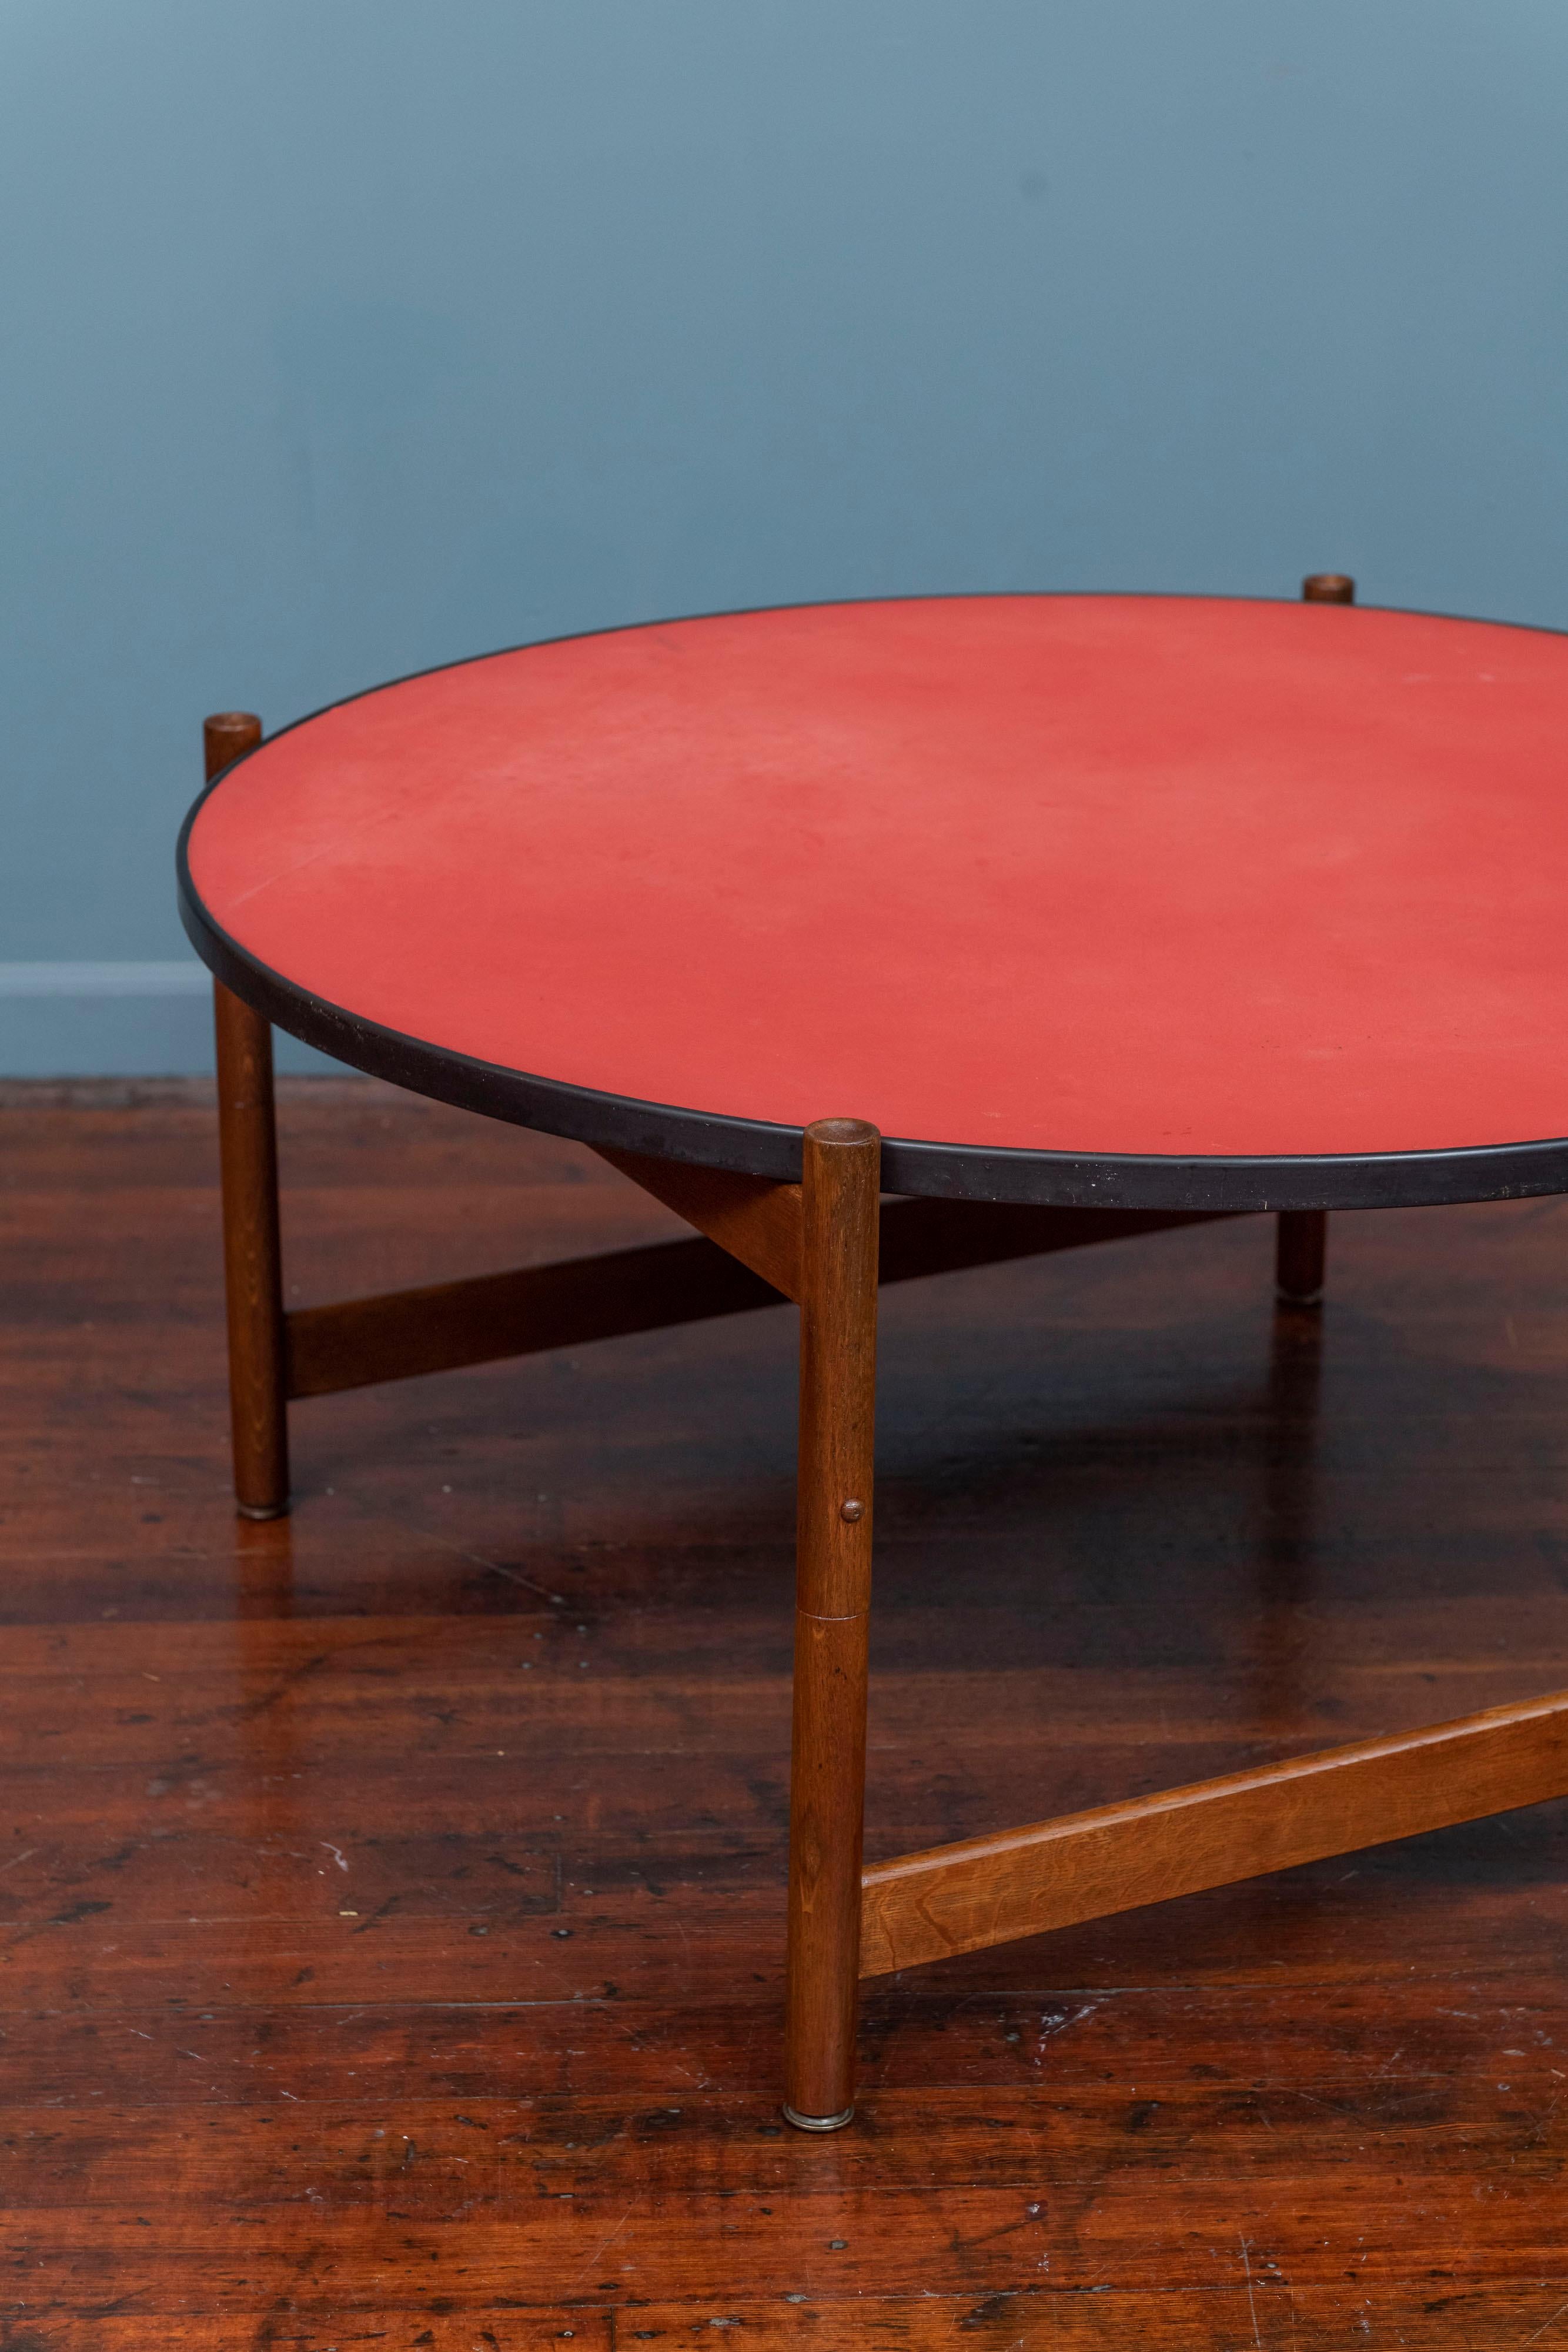 Danish Modern flip top coffee table attributed to Ludvig Pontoppidan, Denmark. Interesting and practical reversible top and collapsible coffee table. 
Newly refinished oak base with dimpled legs that folds up to be portable or used for serving food